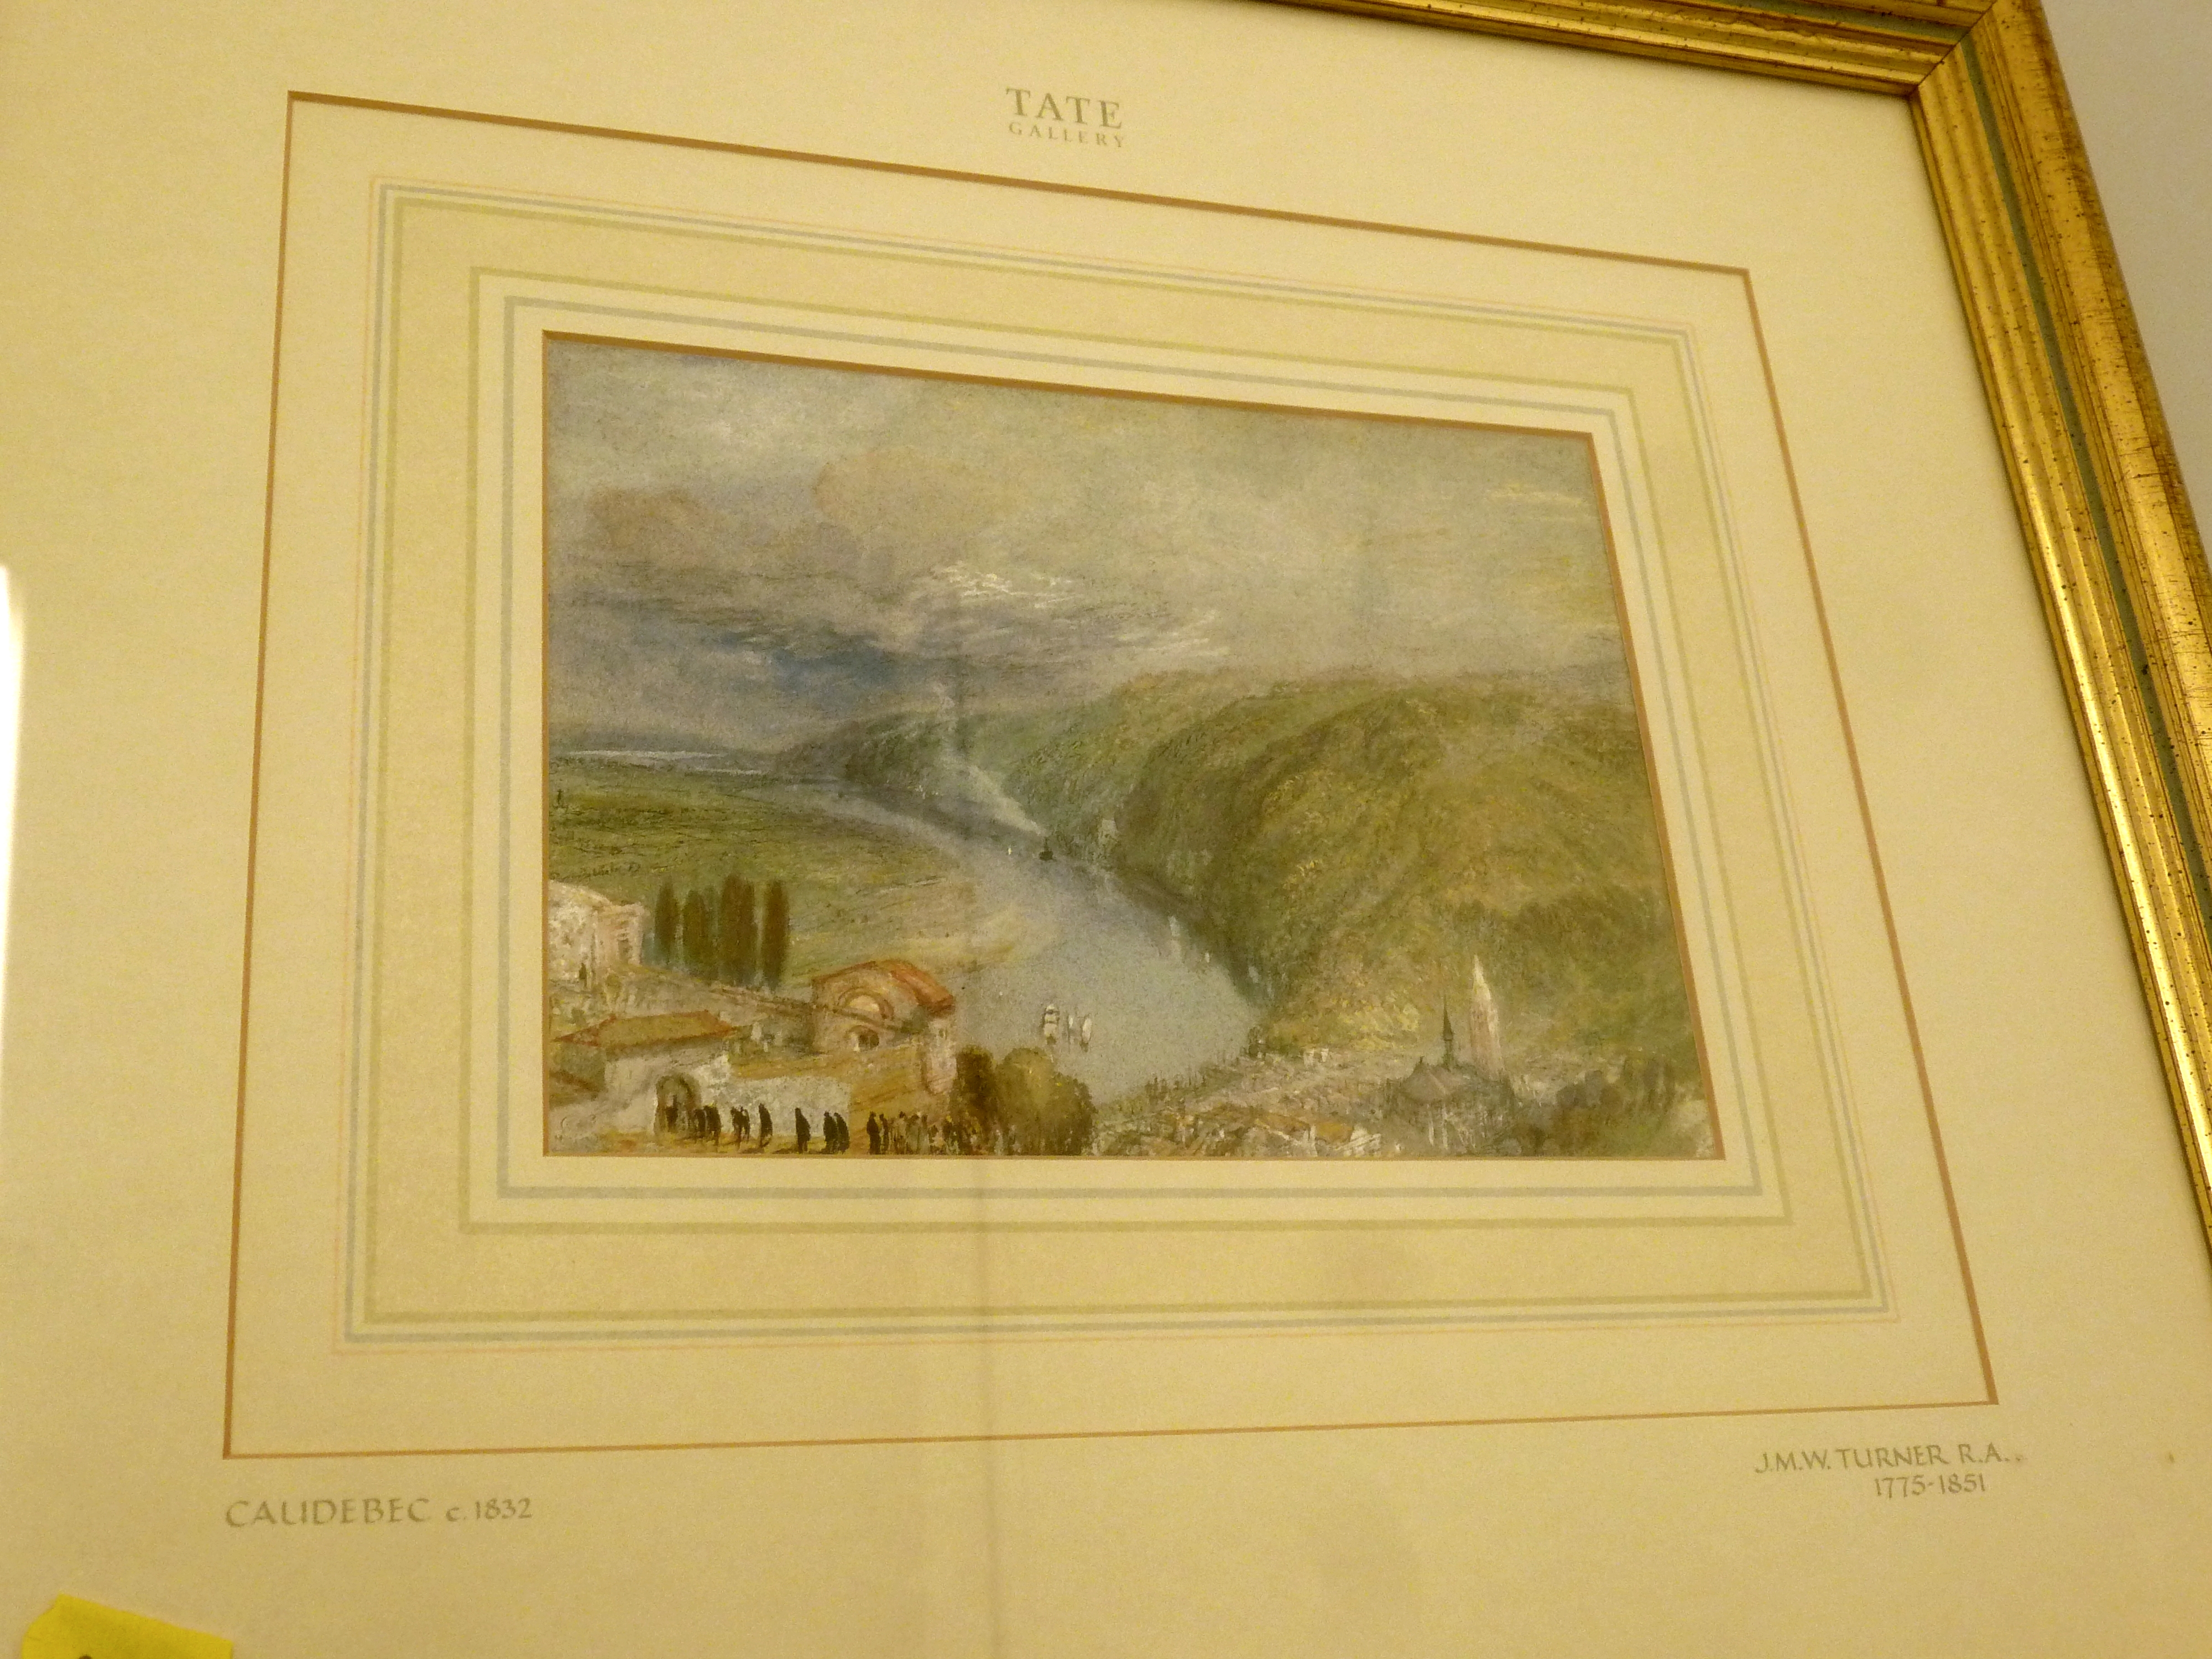 4 TATE GALLERY LIMITED EDITION J.M.W. TURNER 'WANDERINGS BY THE SEINE' PRINTS 908/5000 APPROX 5. - Image 8 of 9